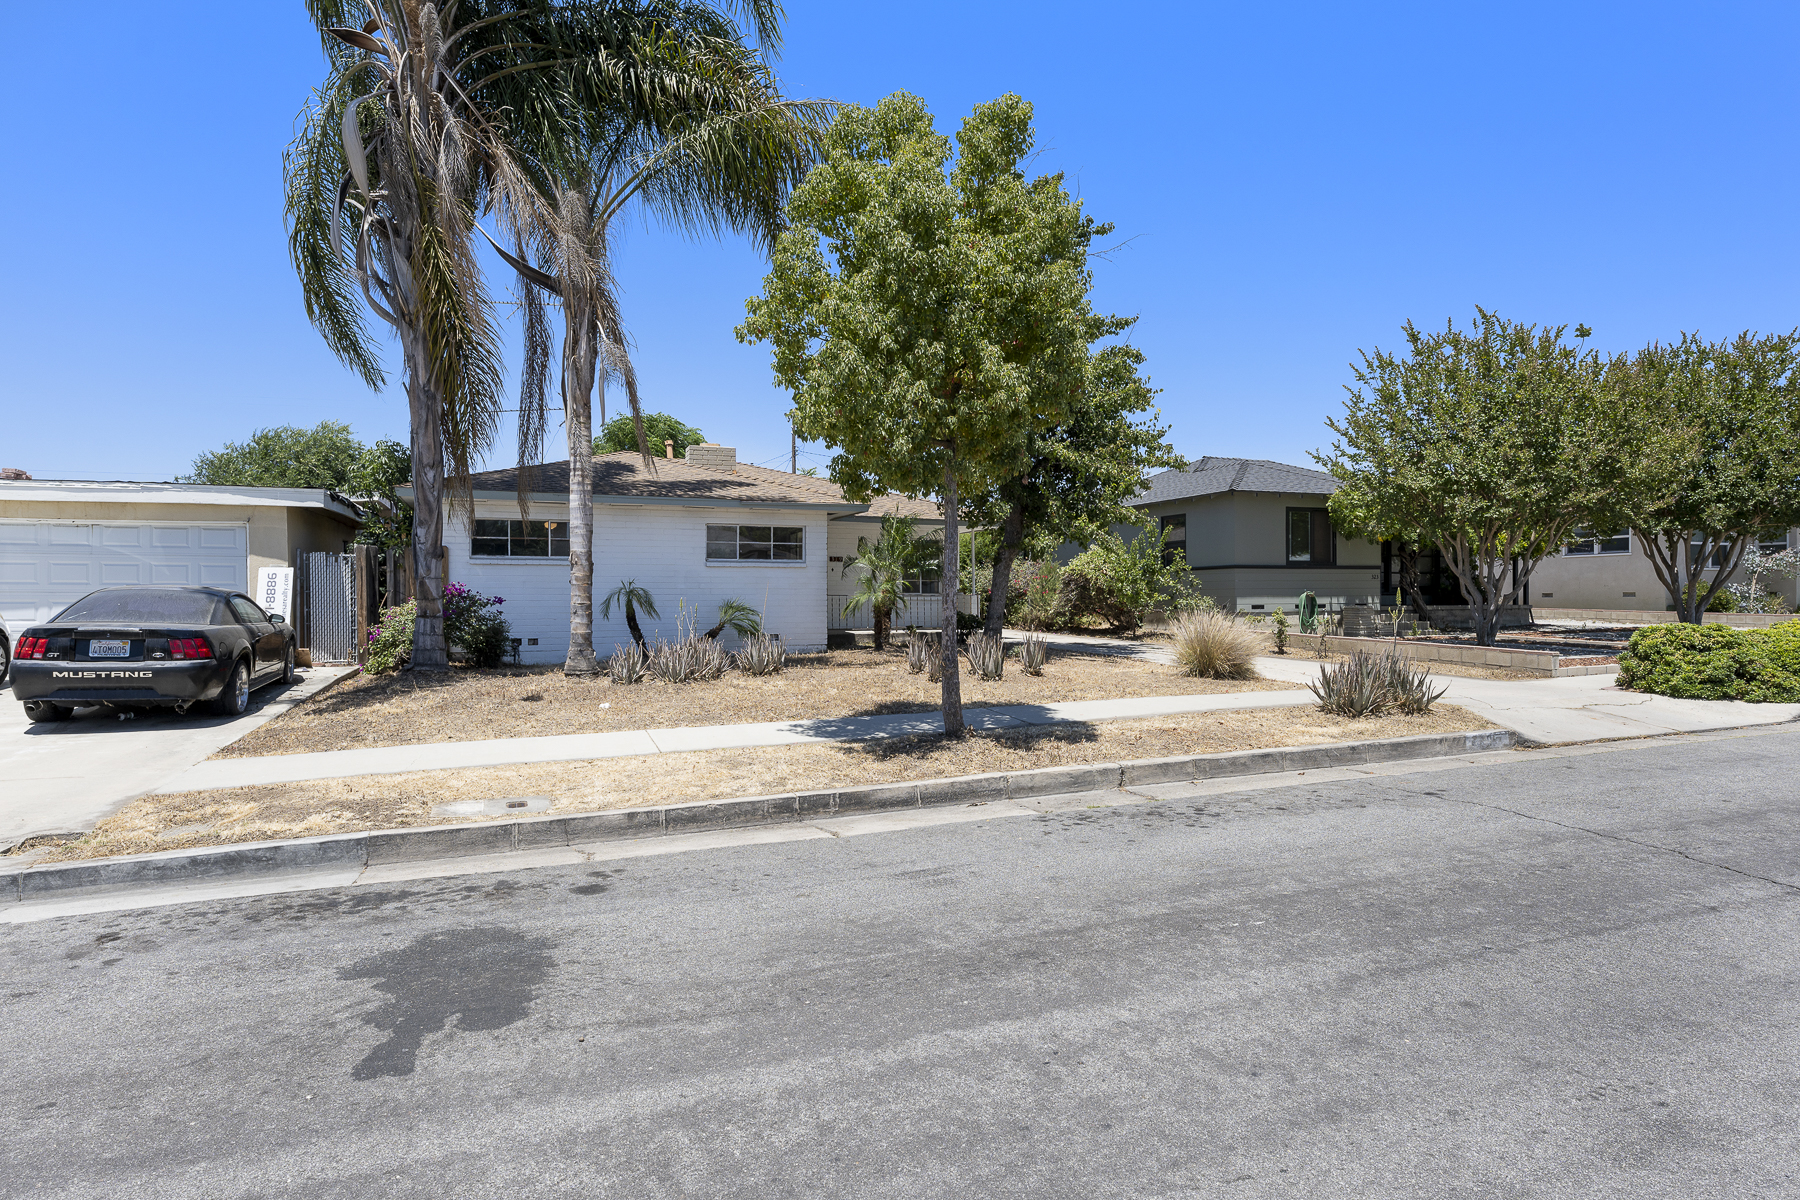 319 E. Francis Ave, La Habra, CA 90631: Exterior angled shot full front, wide street view.